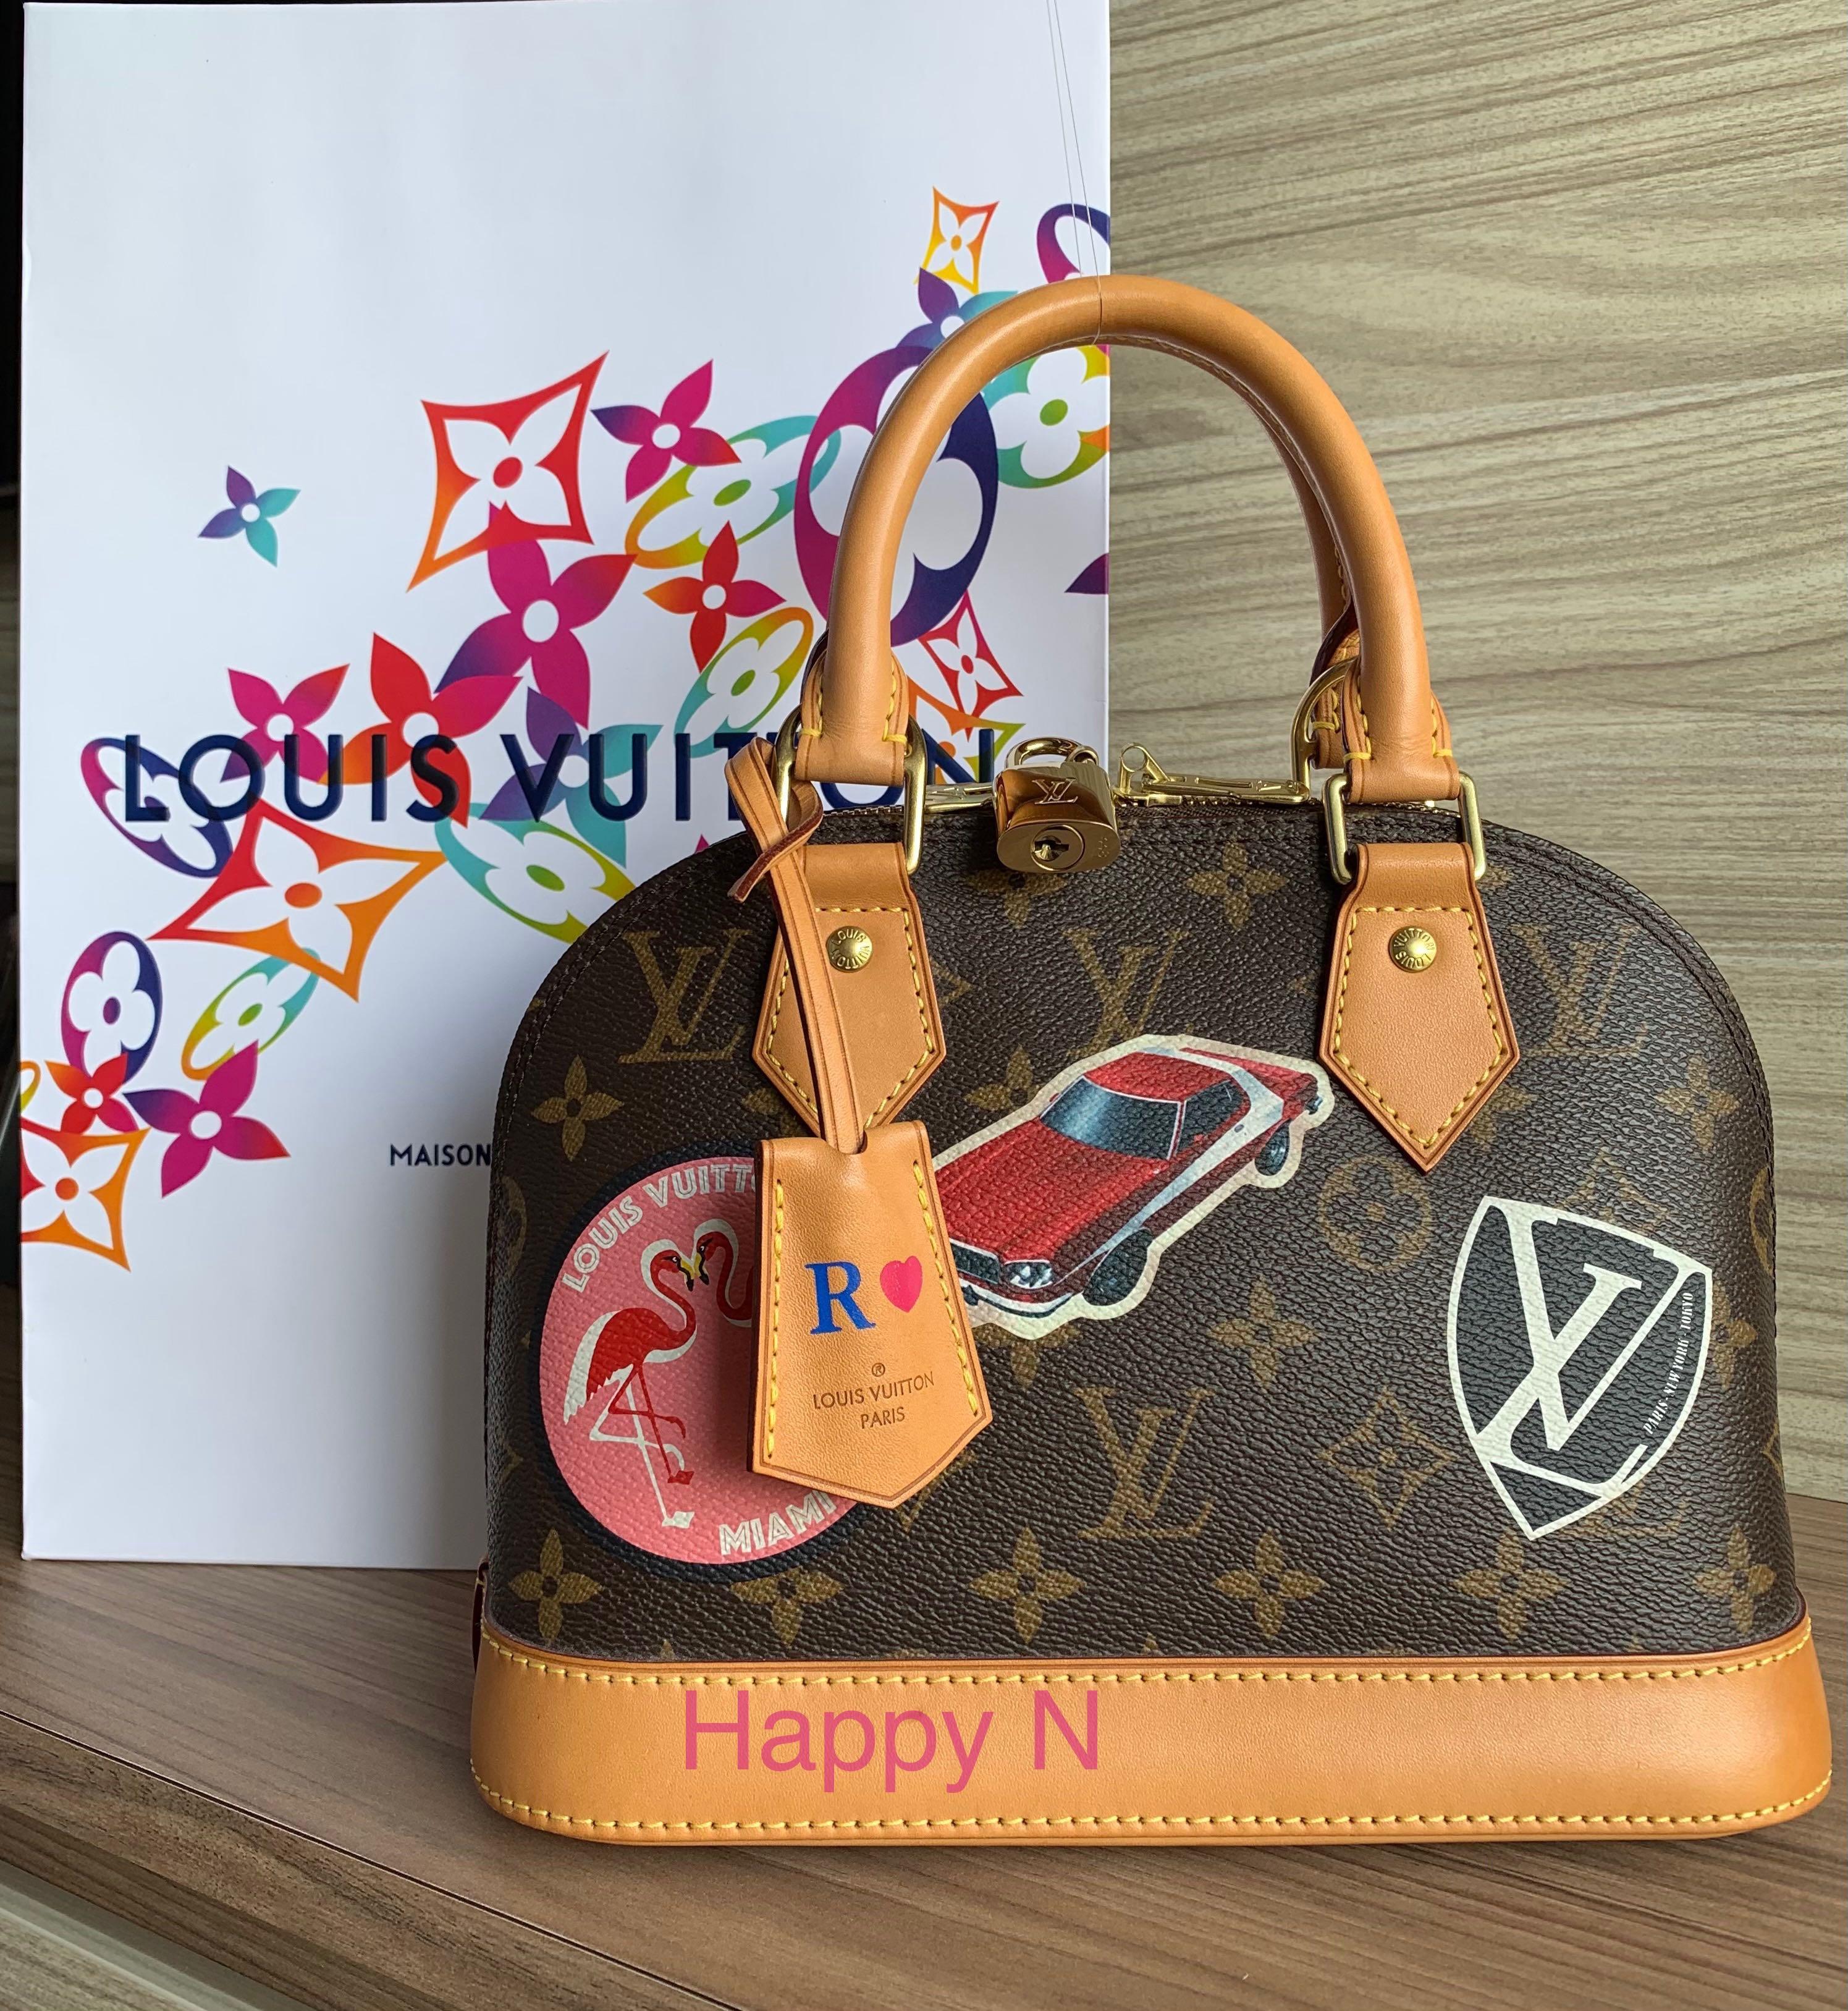 LOUIS VUITTON ALMA BB MONOGRAM  WEAR AND TEAR REVIEW USED for 7 YEARS! 